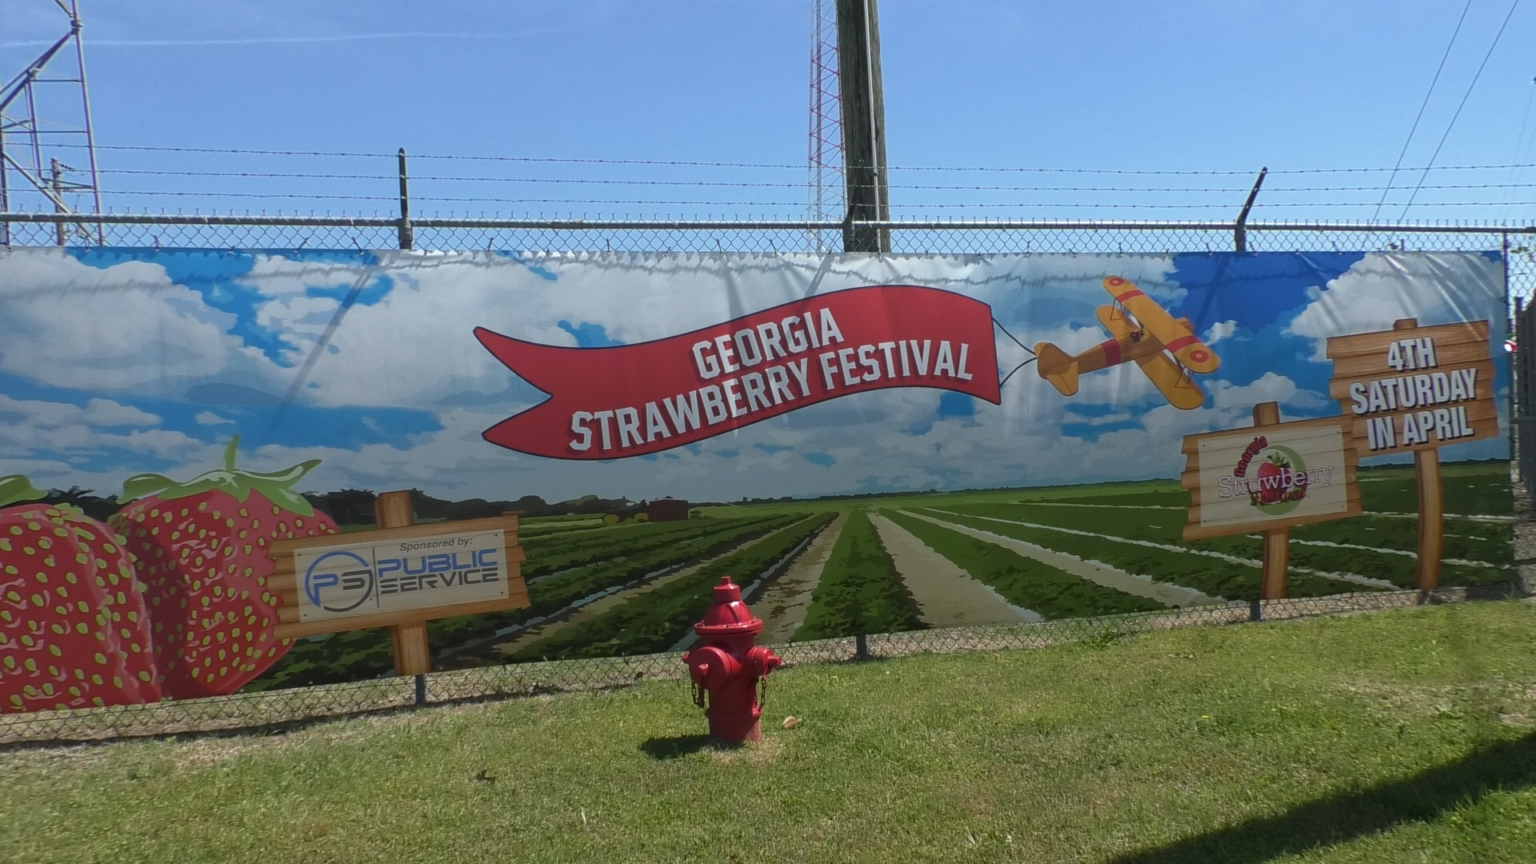 Strawberry Festival returns this weekend for 25th year in